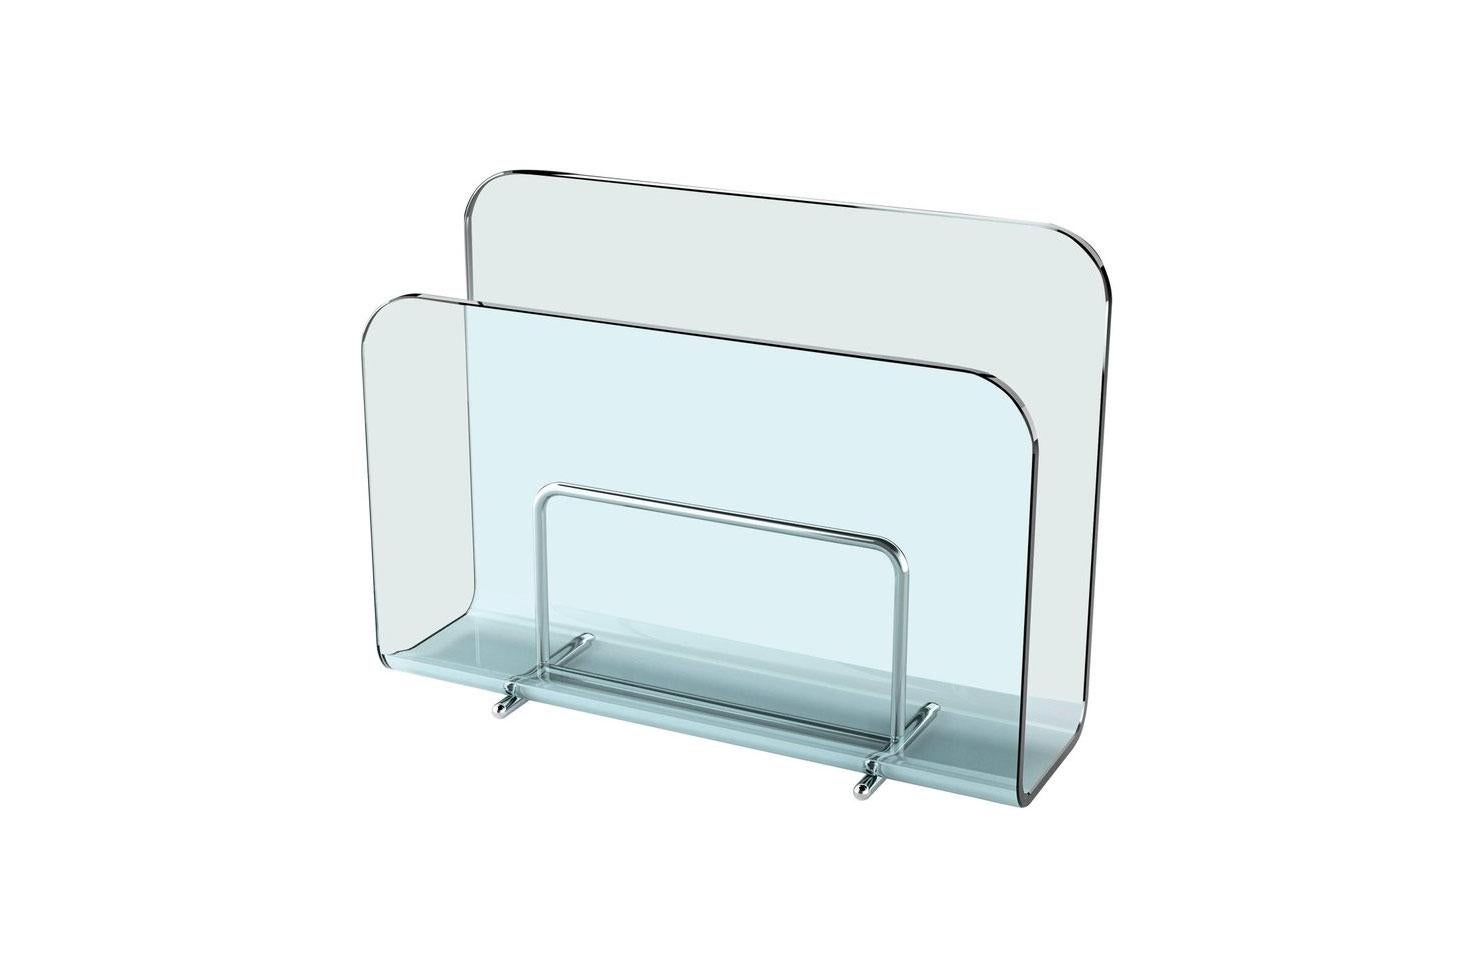 10 mm-thick curved transparent glass magazine rack with steel stand.